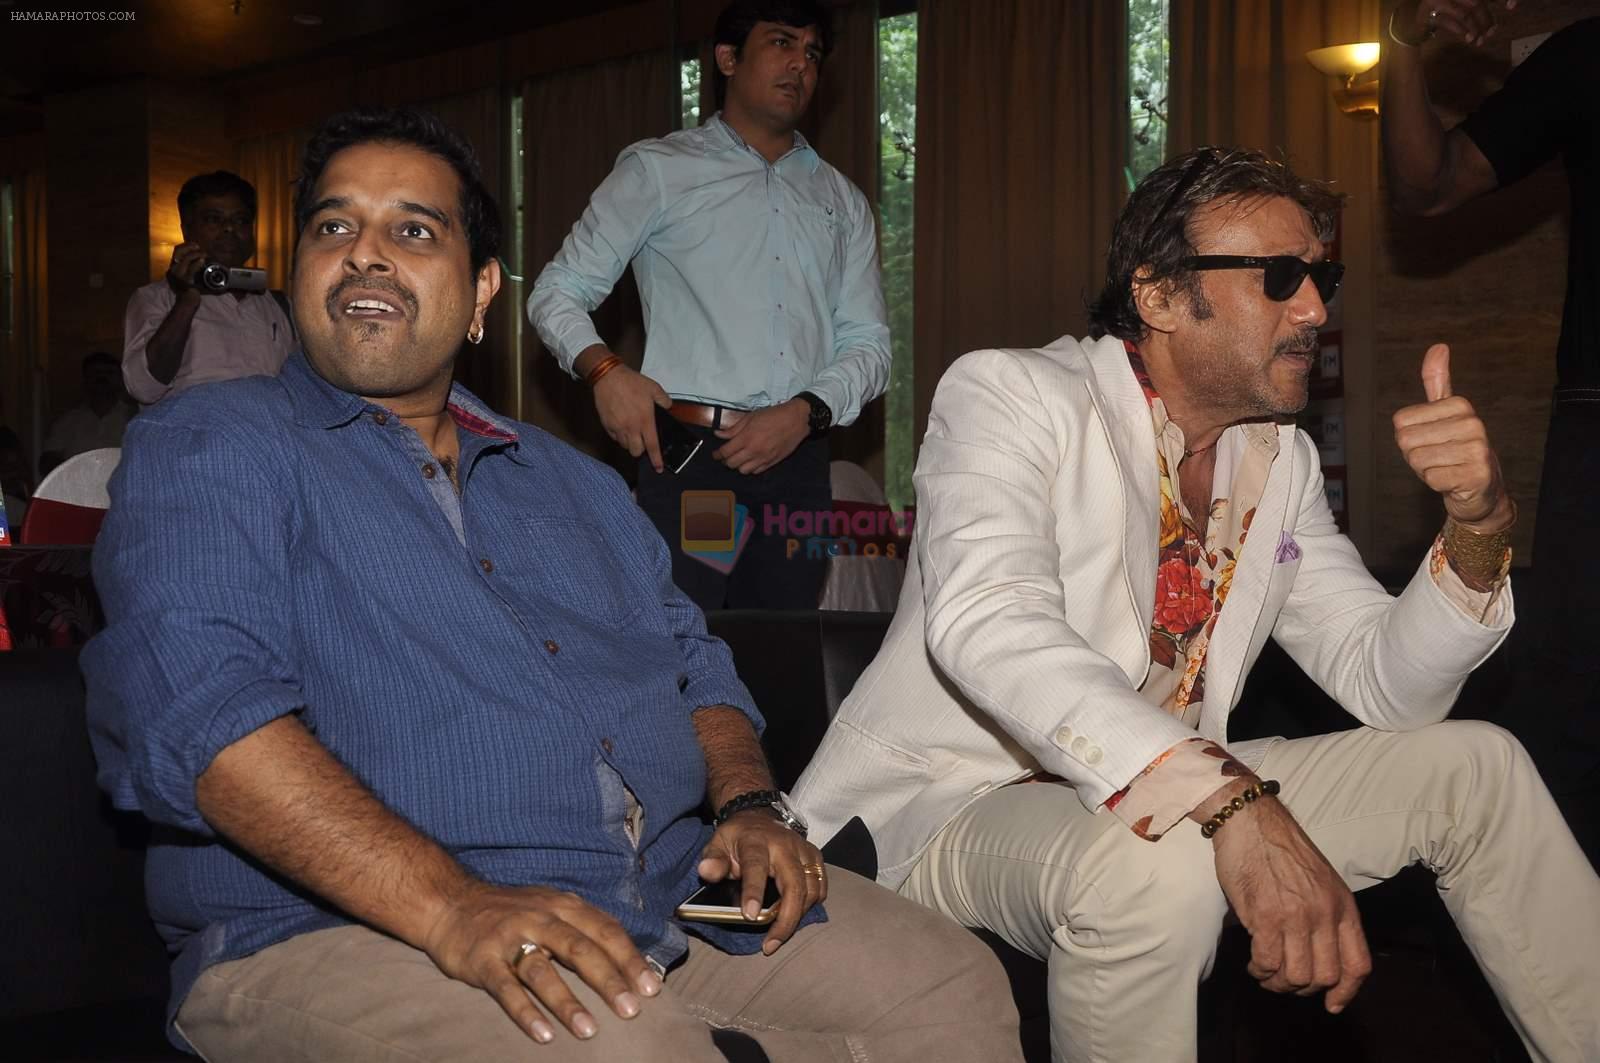 Jackie Shroff and Shankar Mahadevan train kids of the The Golden Voice at Orchid Hotel on 6th Aug 2015